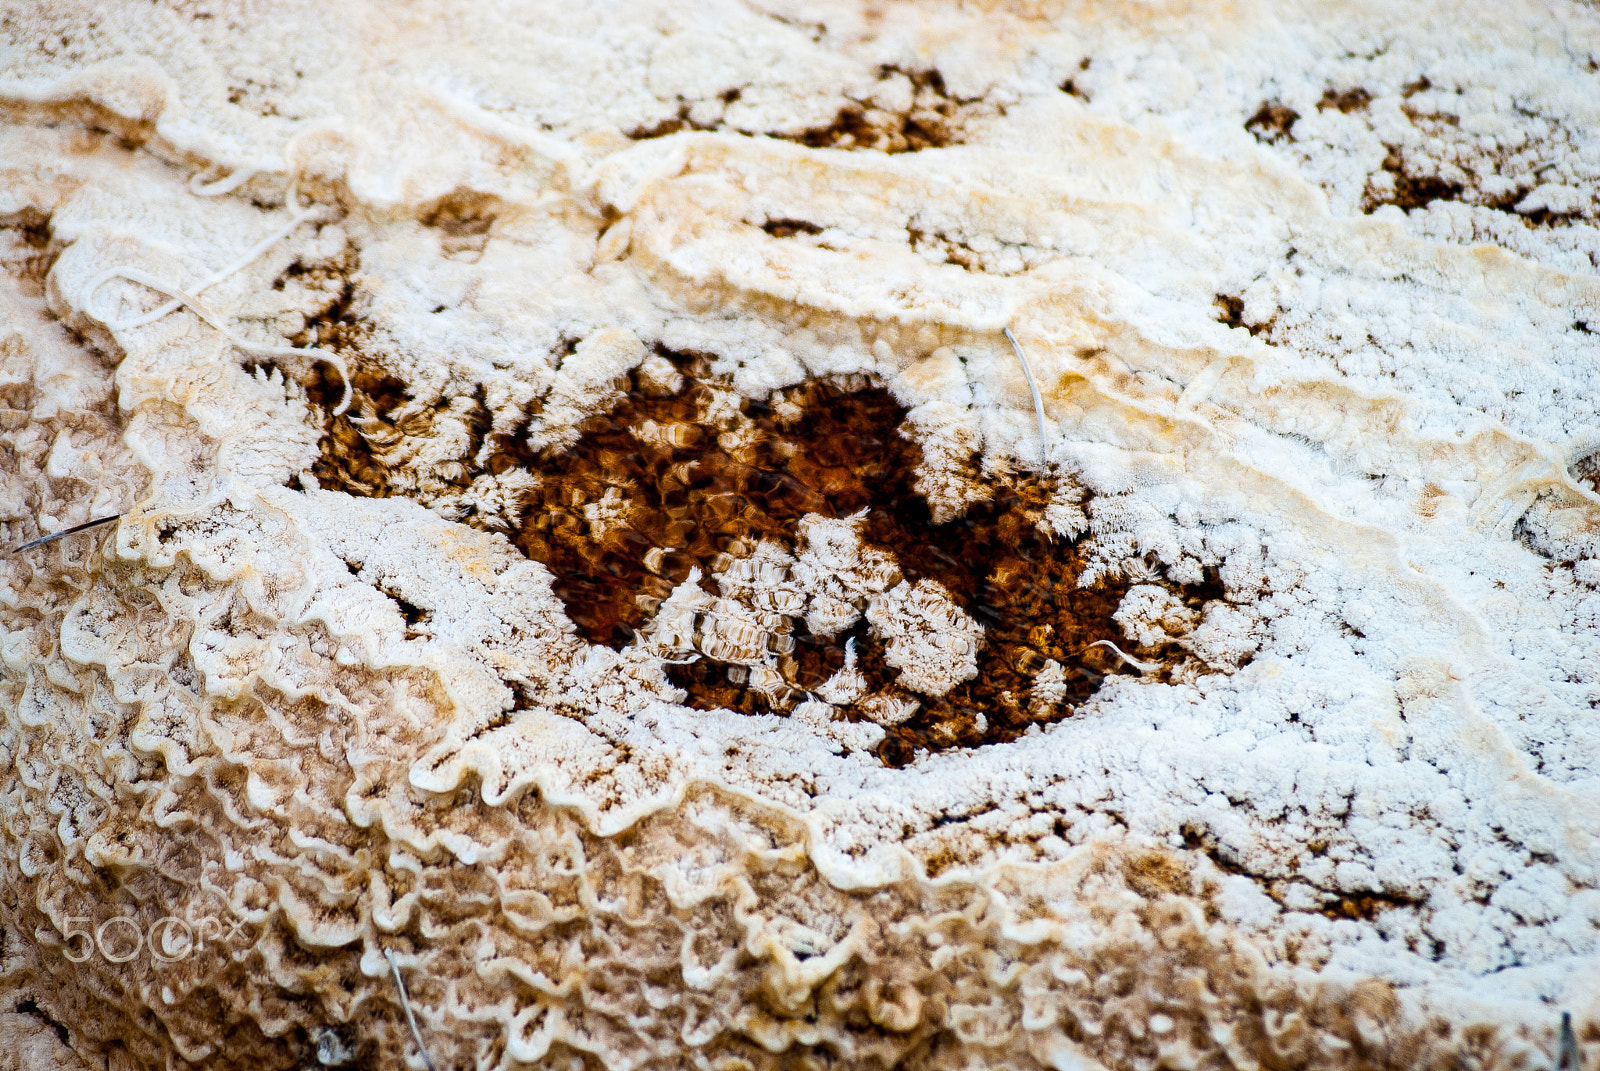 Nikon D200 + AF Zoom-Nikkor 80-200mm f/2.8 ED sample photo. Mammoth hot springs mineral deposition texture photography